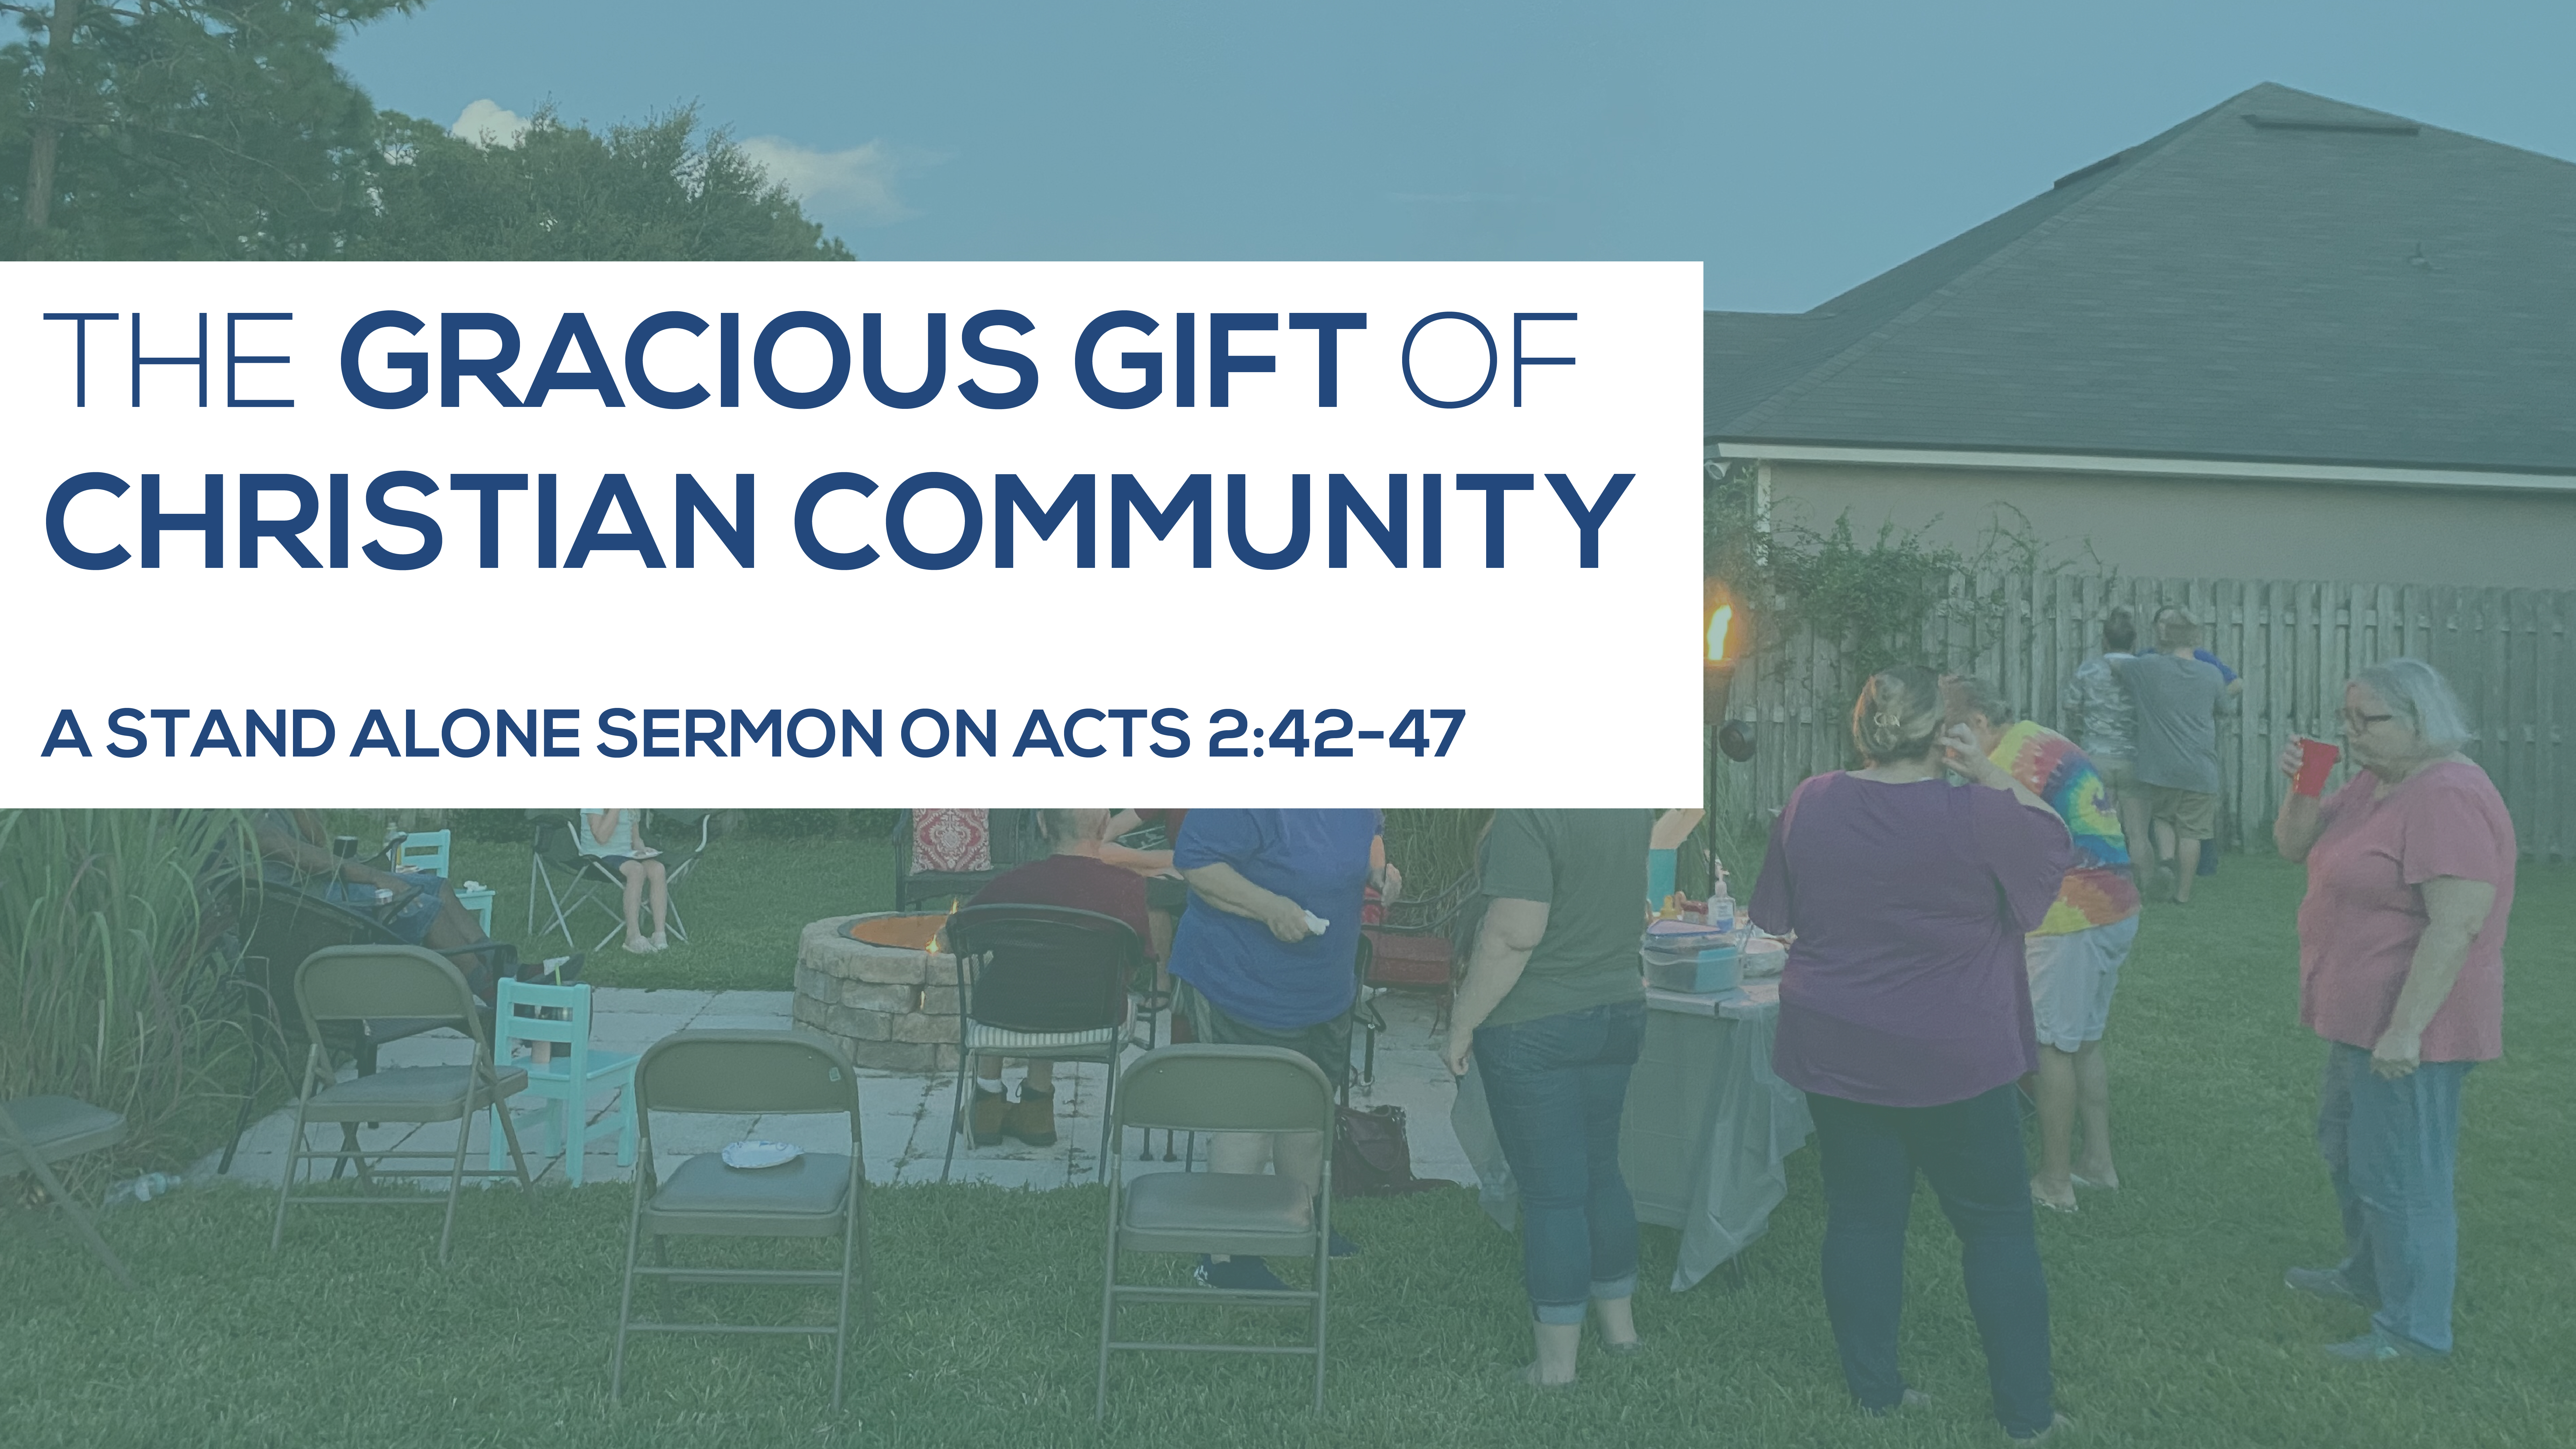 The Gracious Gift of Christian Community